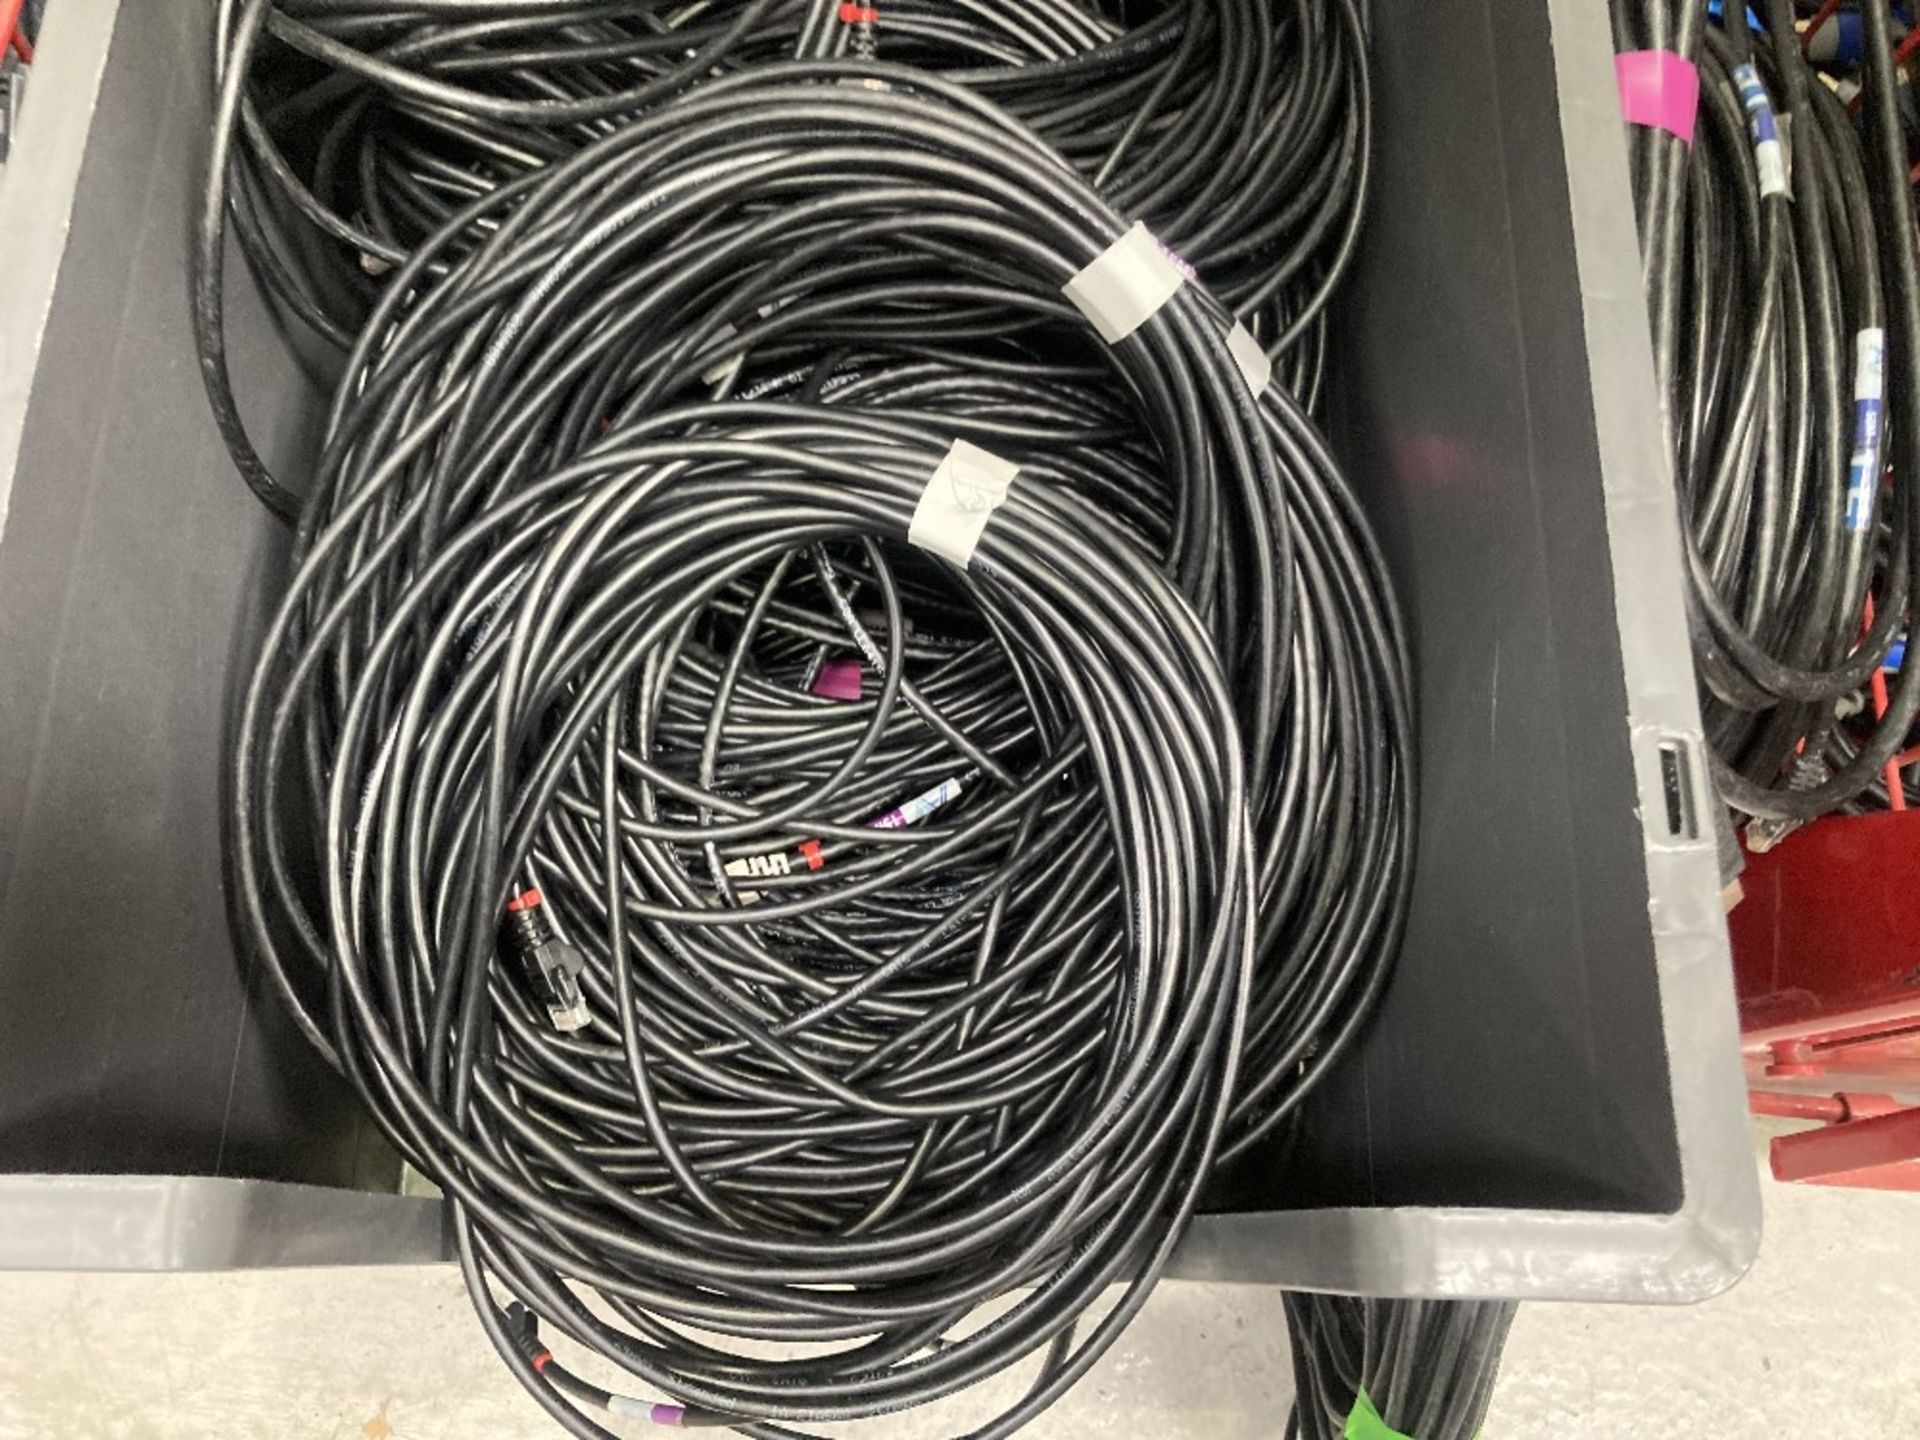 Large Quantity of 15m Ethernet Cable CAT 6 with Plastic Lin Bin - Image 3 of 4